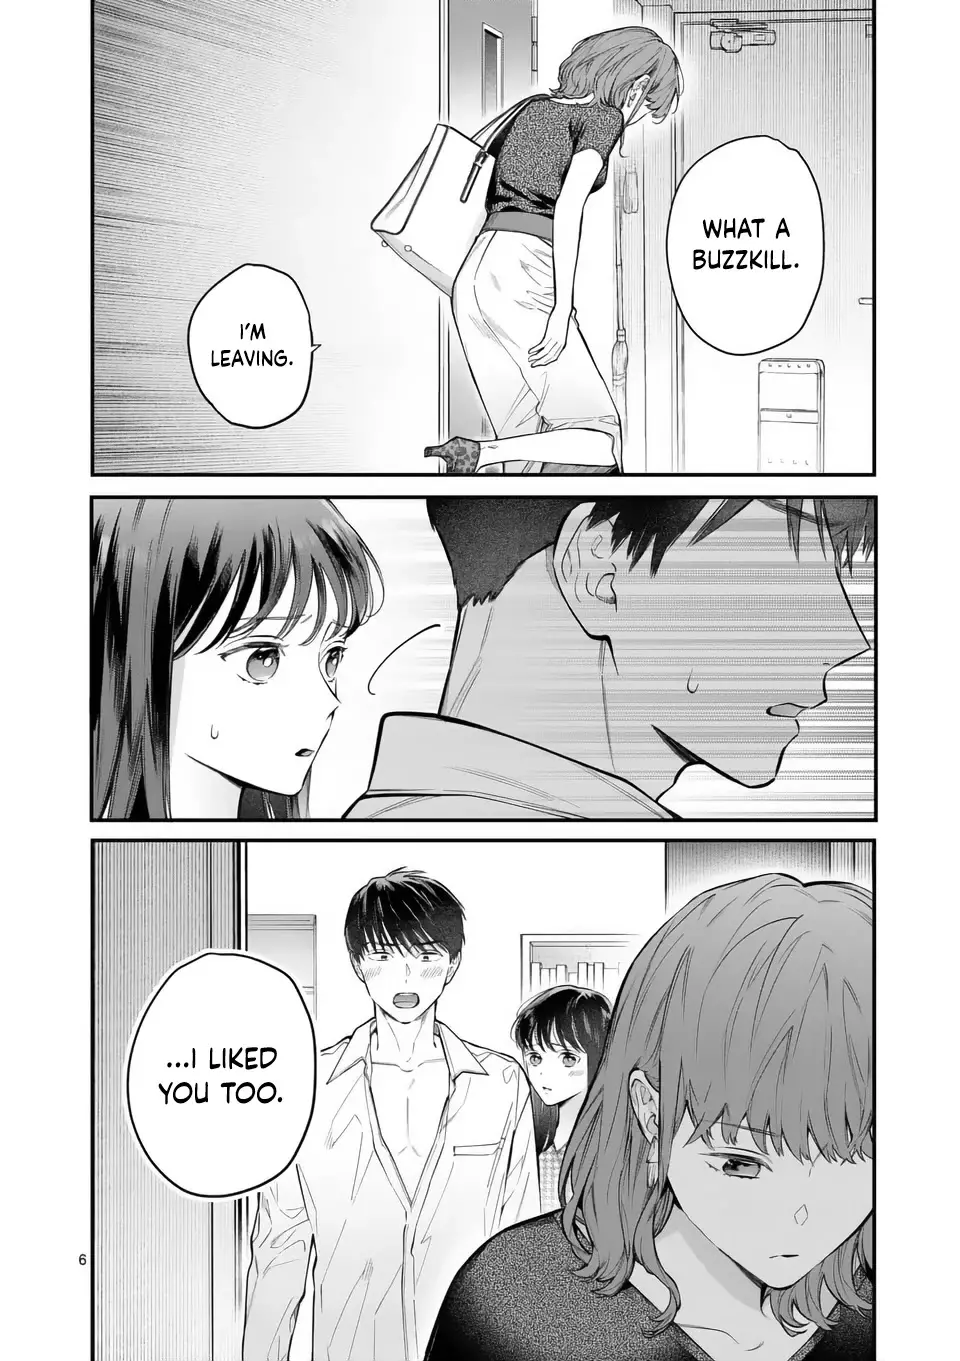 Is It Wrong To Get Done By A Girl? - 10 page 7